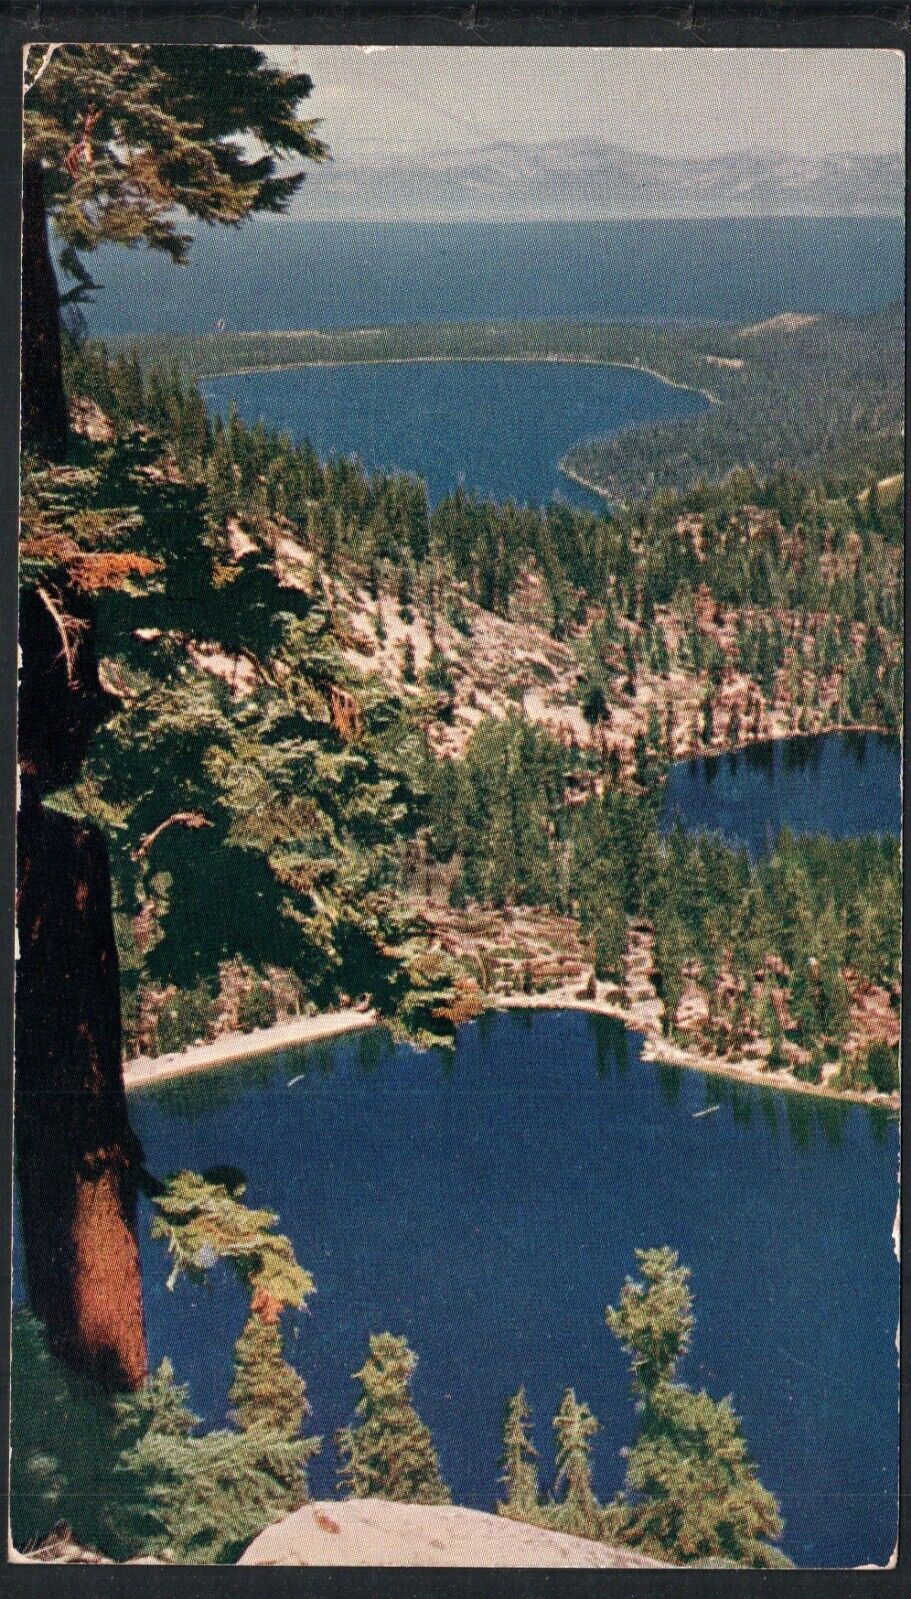 LAKE TAHOE, CA * 4 LAKES AERIAL VIEW * POSTED 1954 CAMP RICHARDSON VNTAGE CHROME